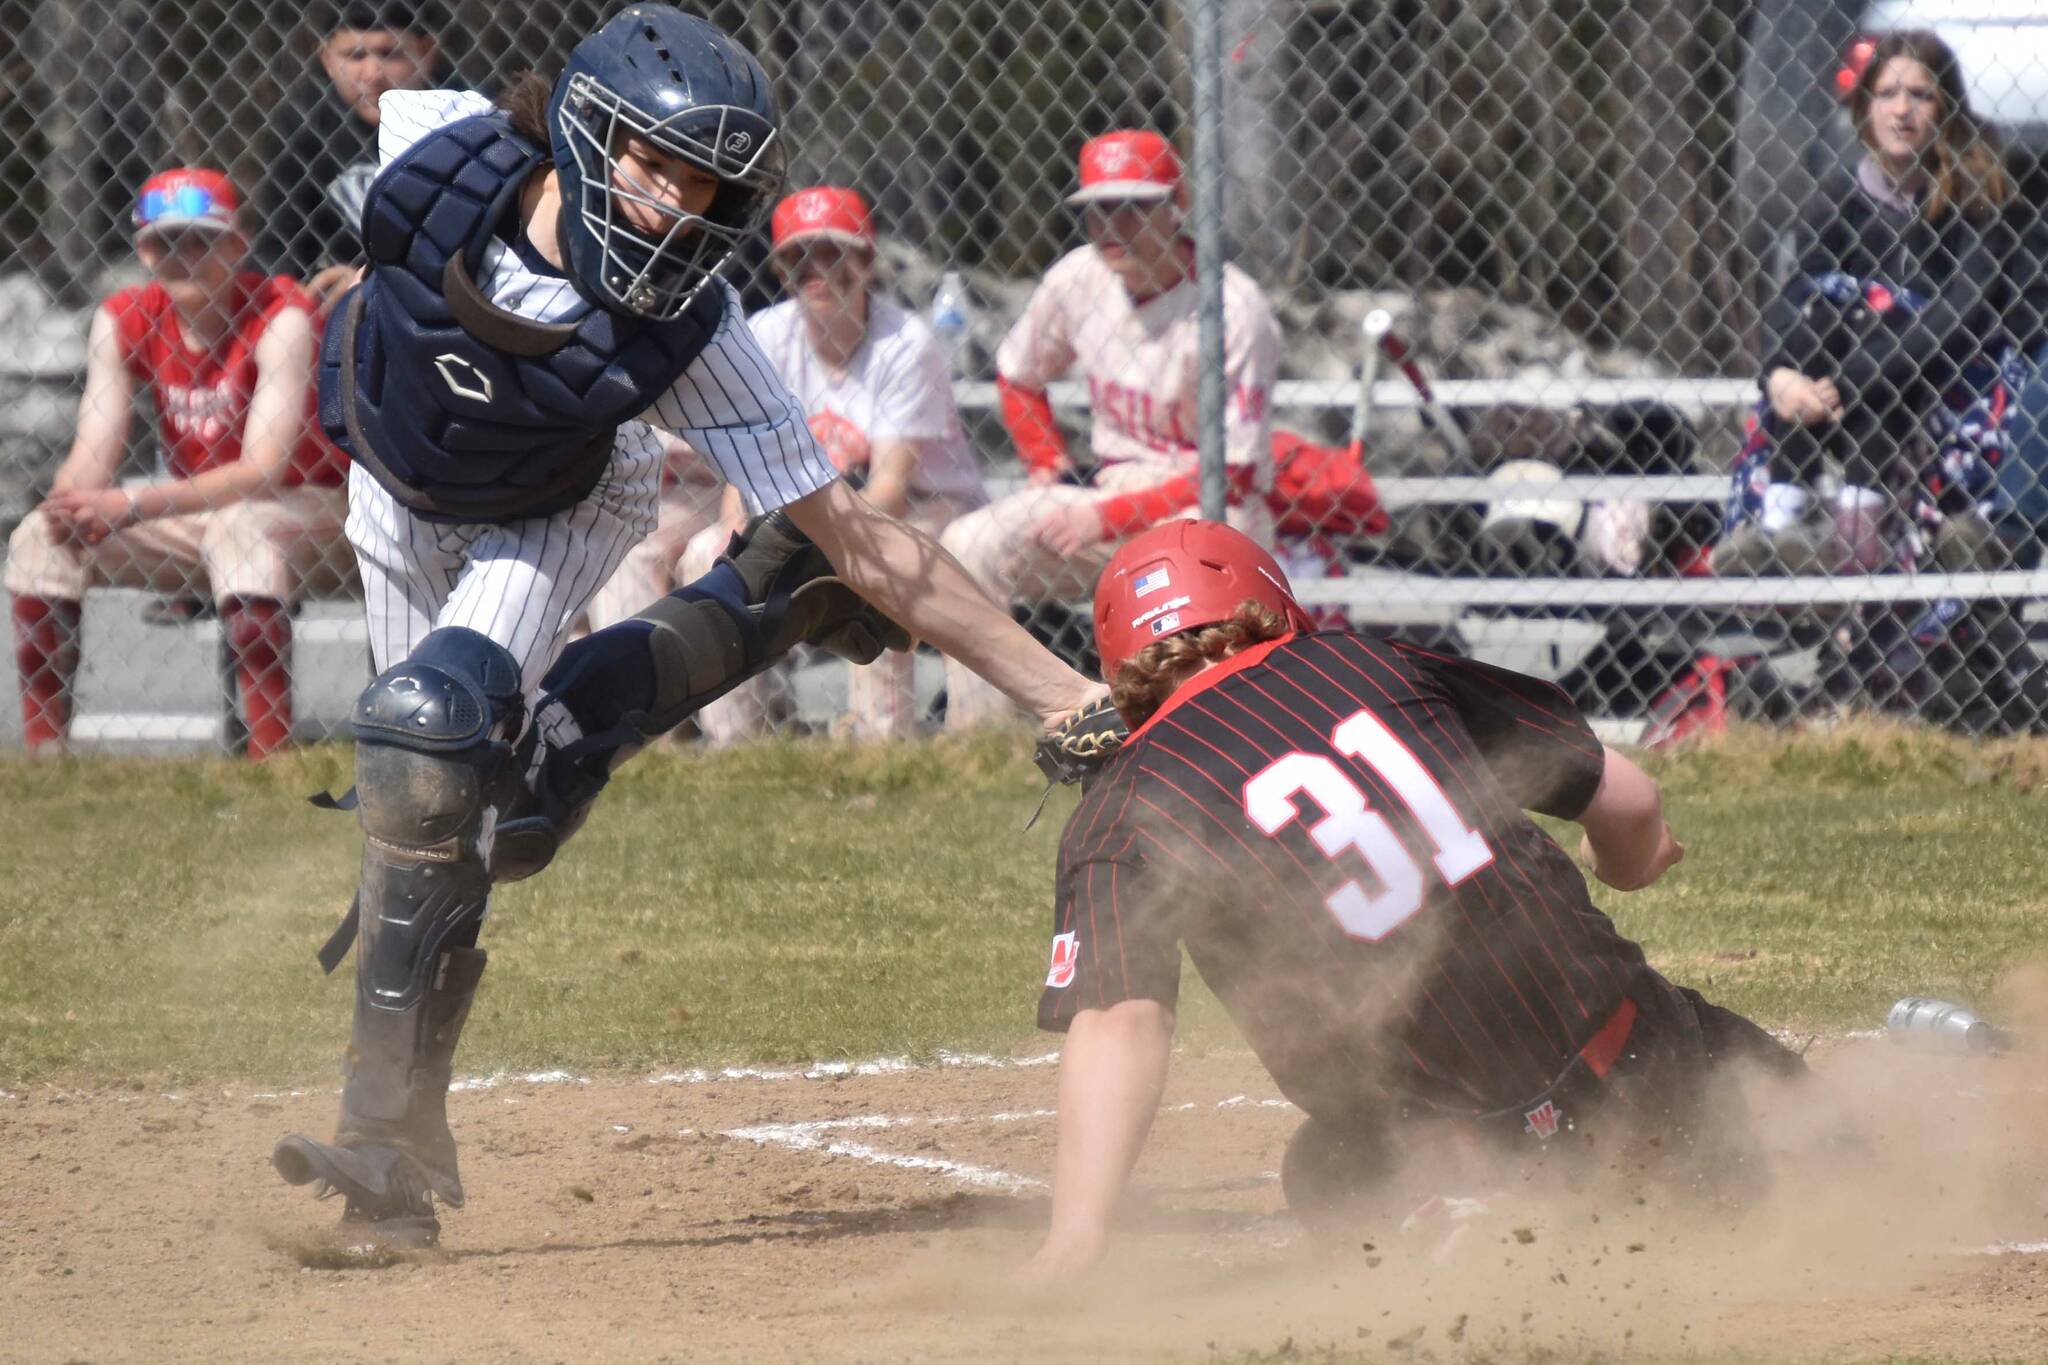 Soldotna catcher Ari Miller tags out Wasilla's Whalen Halverson at the plate Saturday, May 13, 2023, at the Soldotna Little League fields in Soldotna, Alaska. (Photo by Jeff Helminiak/Peninsula Clarion)